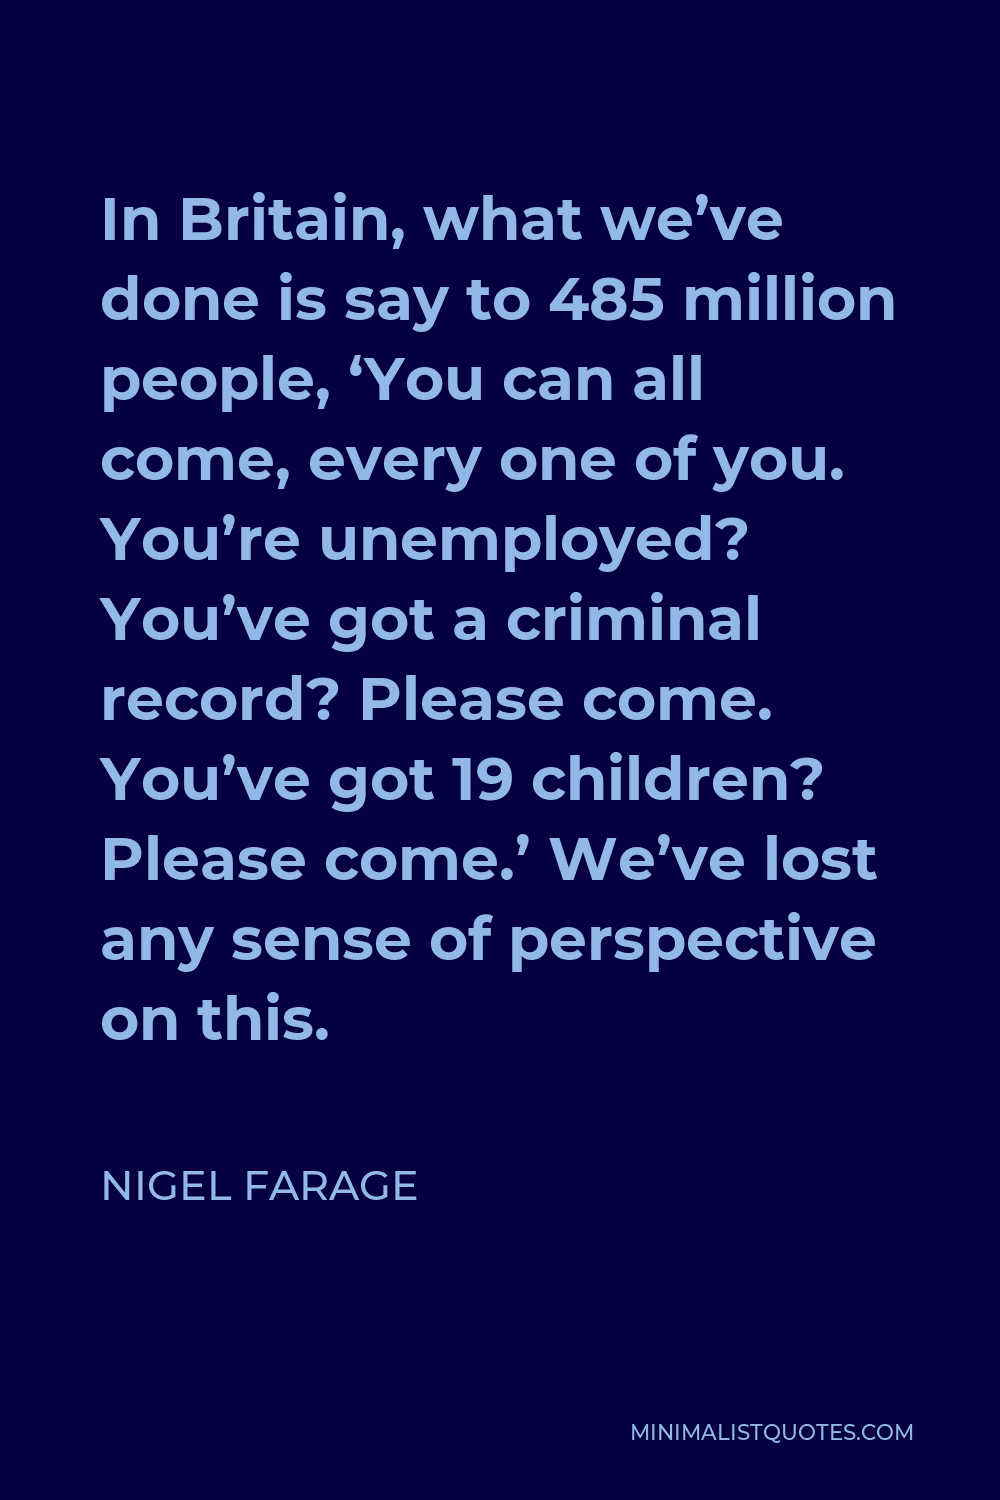 Nigel Farage Quote - In Britain, what we’ve done is say to 485 million people, ‘You can all come, every one of you. You’re unemployed? You’ve got a criminal record? Please come. You’ve got 19 children? Please come.’ We’ve lost any sense of perspective on this.